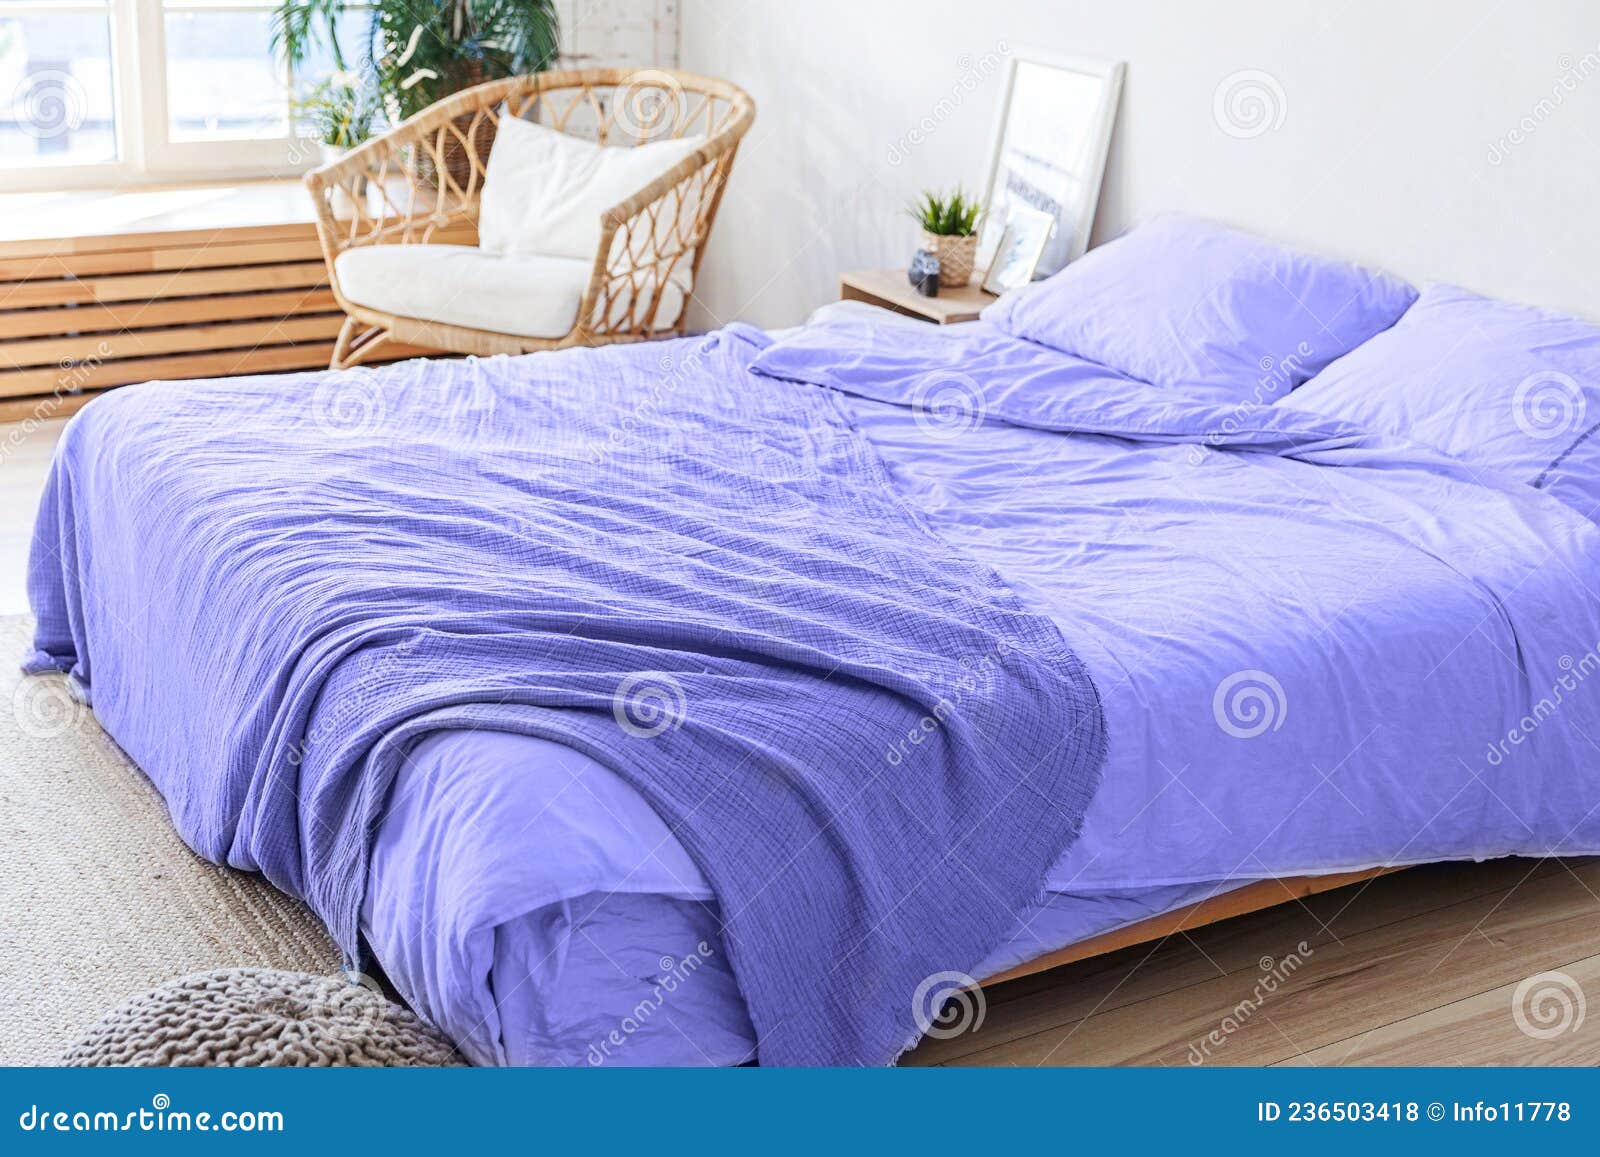 loft bedroom interior, bed linen colored in trendy color of year 2022 very peri background. inspired by using color 17